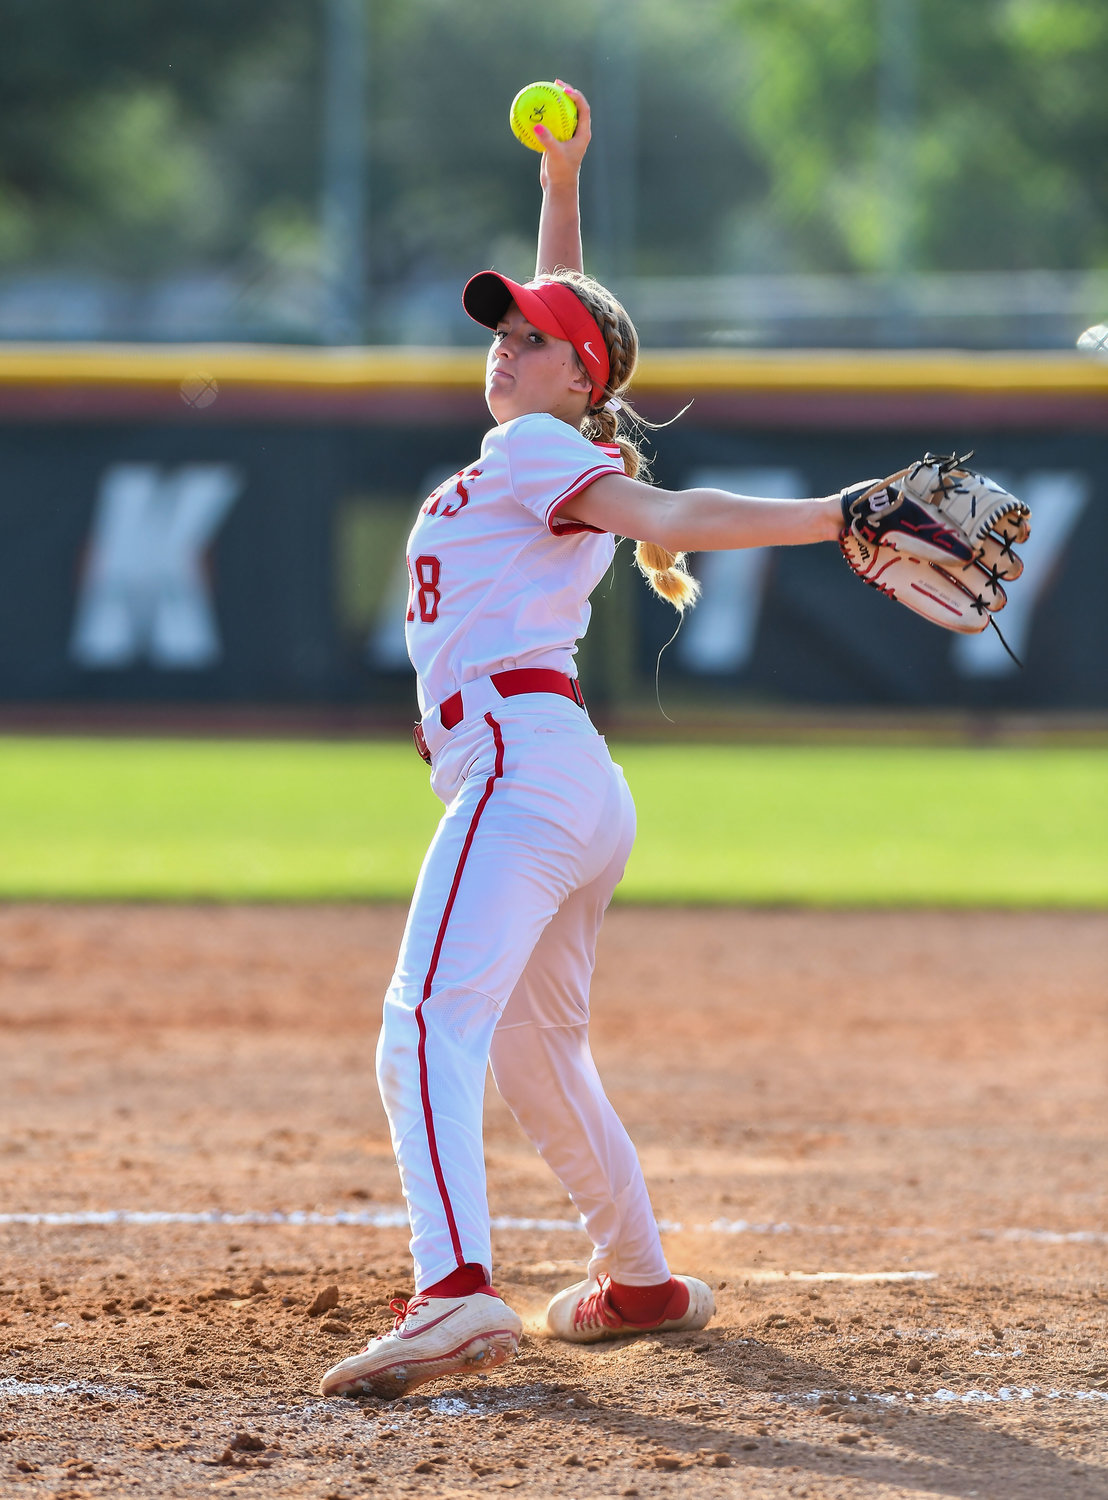 May 13, 2022: Katy's pitcher Lauryn Soeken #18 picks up the win advancing Katy during the Regional Quarterfinal playoff between Katy and Cinco Ranch at Katy HS. (Photo by Mark Goodman / Katy Times)